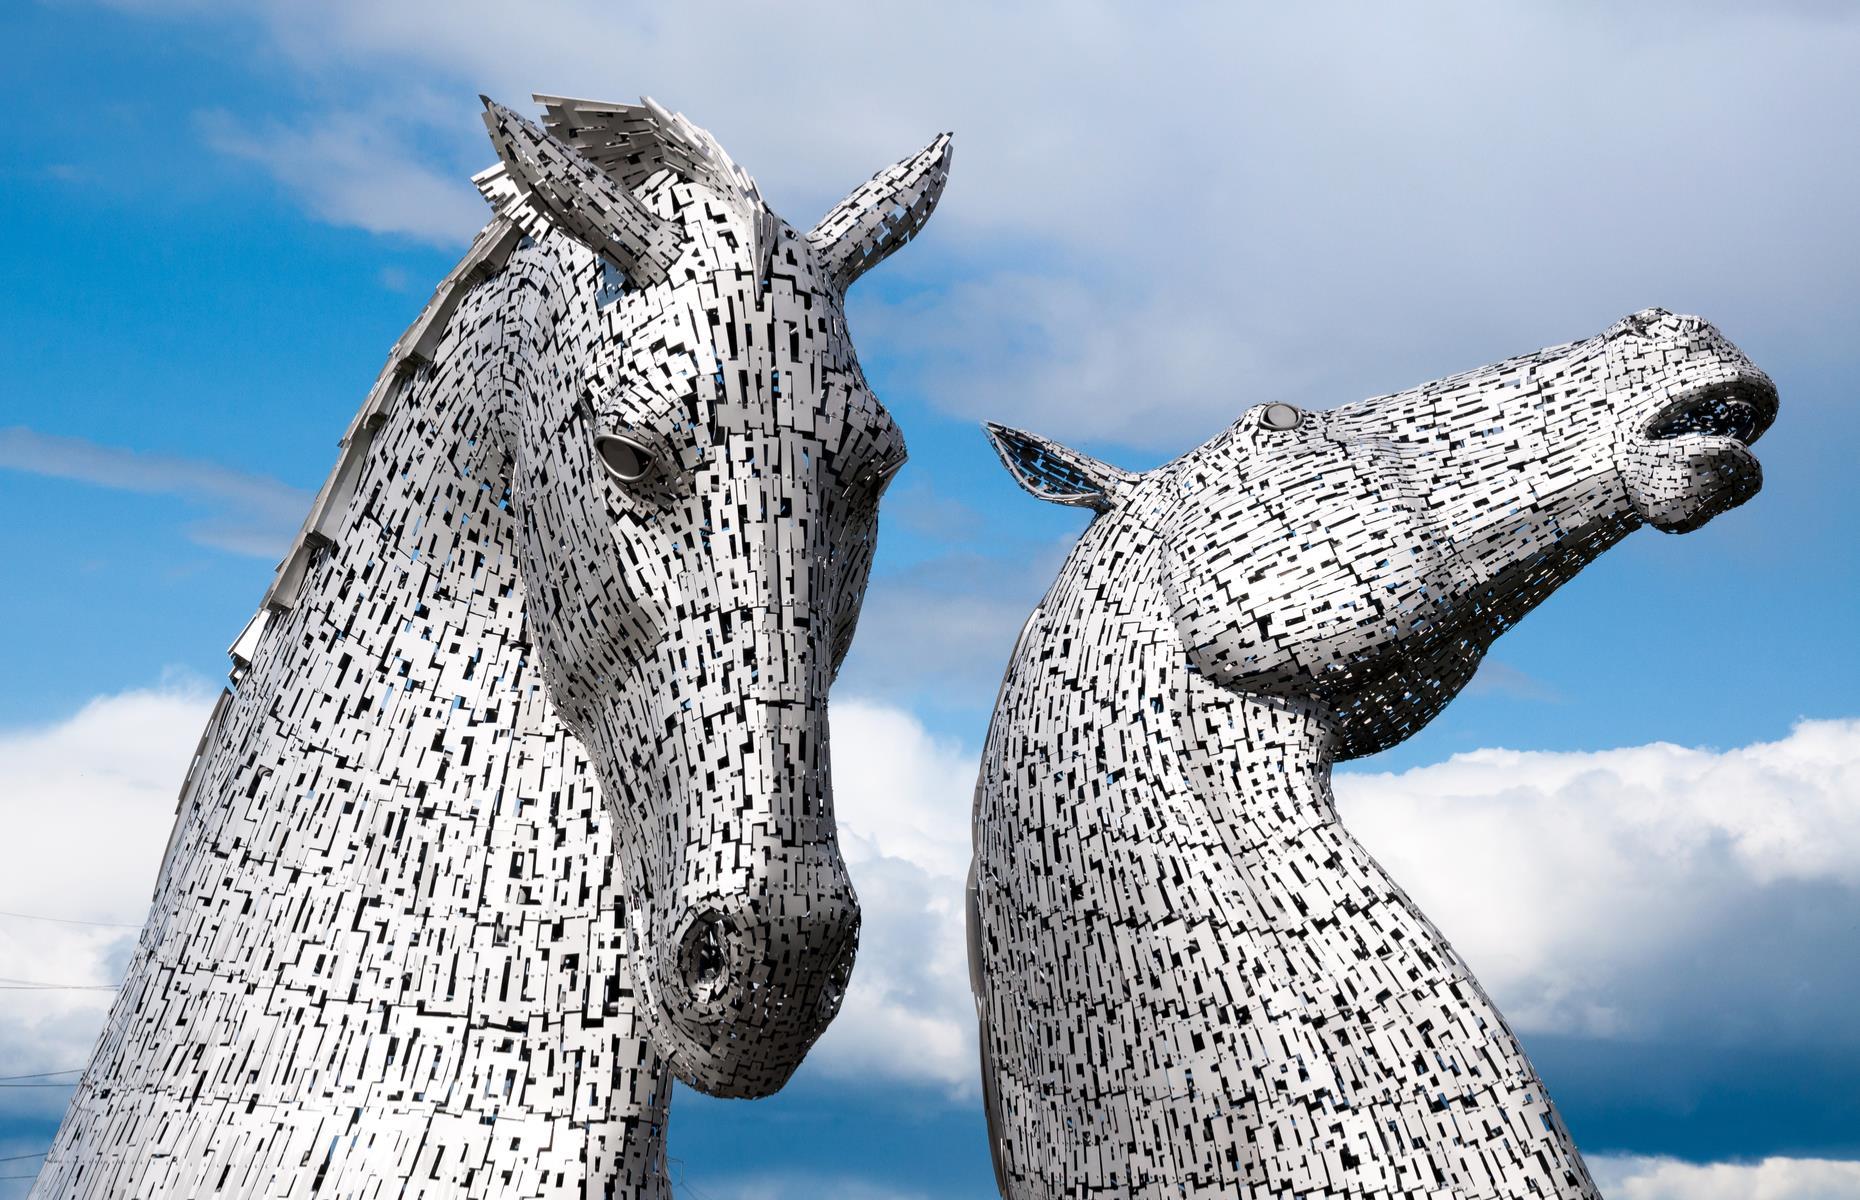 <p>These breathtaking 100-foot-high (30m) stainless steel equine statues in Scotland are the largest equine sculptures in the world. Created by artist Andy Scott, the Kelpies were modelled on two real-life Clydesdale horses, named Duke and Baron. The sculptures sit within The Helix, a green space created in 2003 to connect the communities in Falkirk. Considered an incredible feat of engineering, the Kelpies have become one of the most famous outdoor installations in the UK.</p>  <p><strong><a href="https://www.loveexploring.com/galleries/82867/the-worlds-most-jaw-dropping-sculptures-and-statues?page=1">Check out the world’s most jaw-dropping sculptures and statues</a></strong></p>